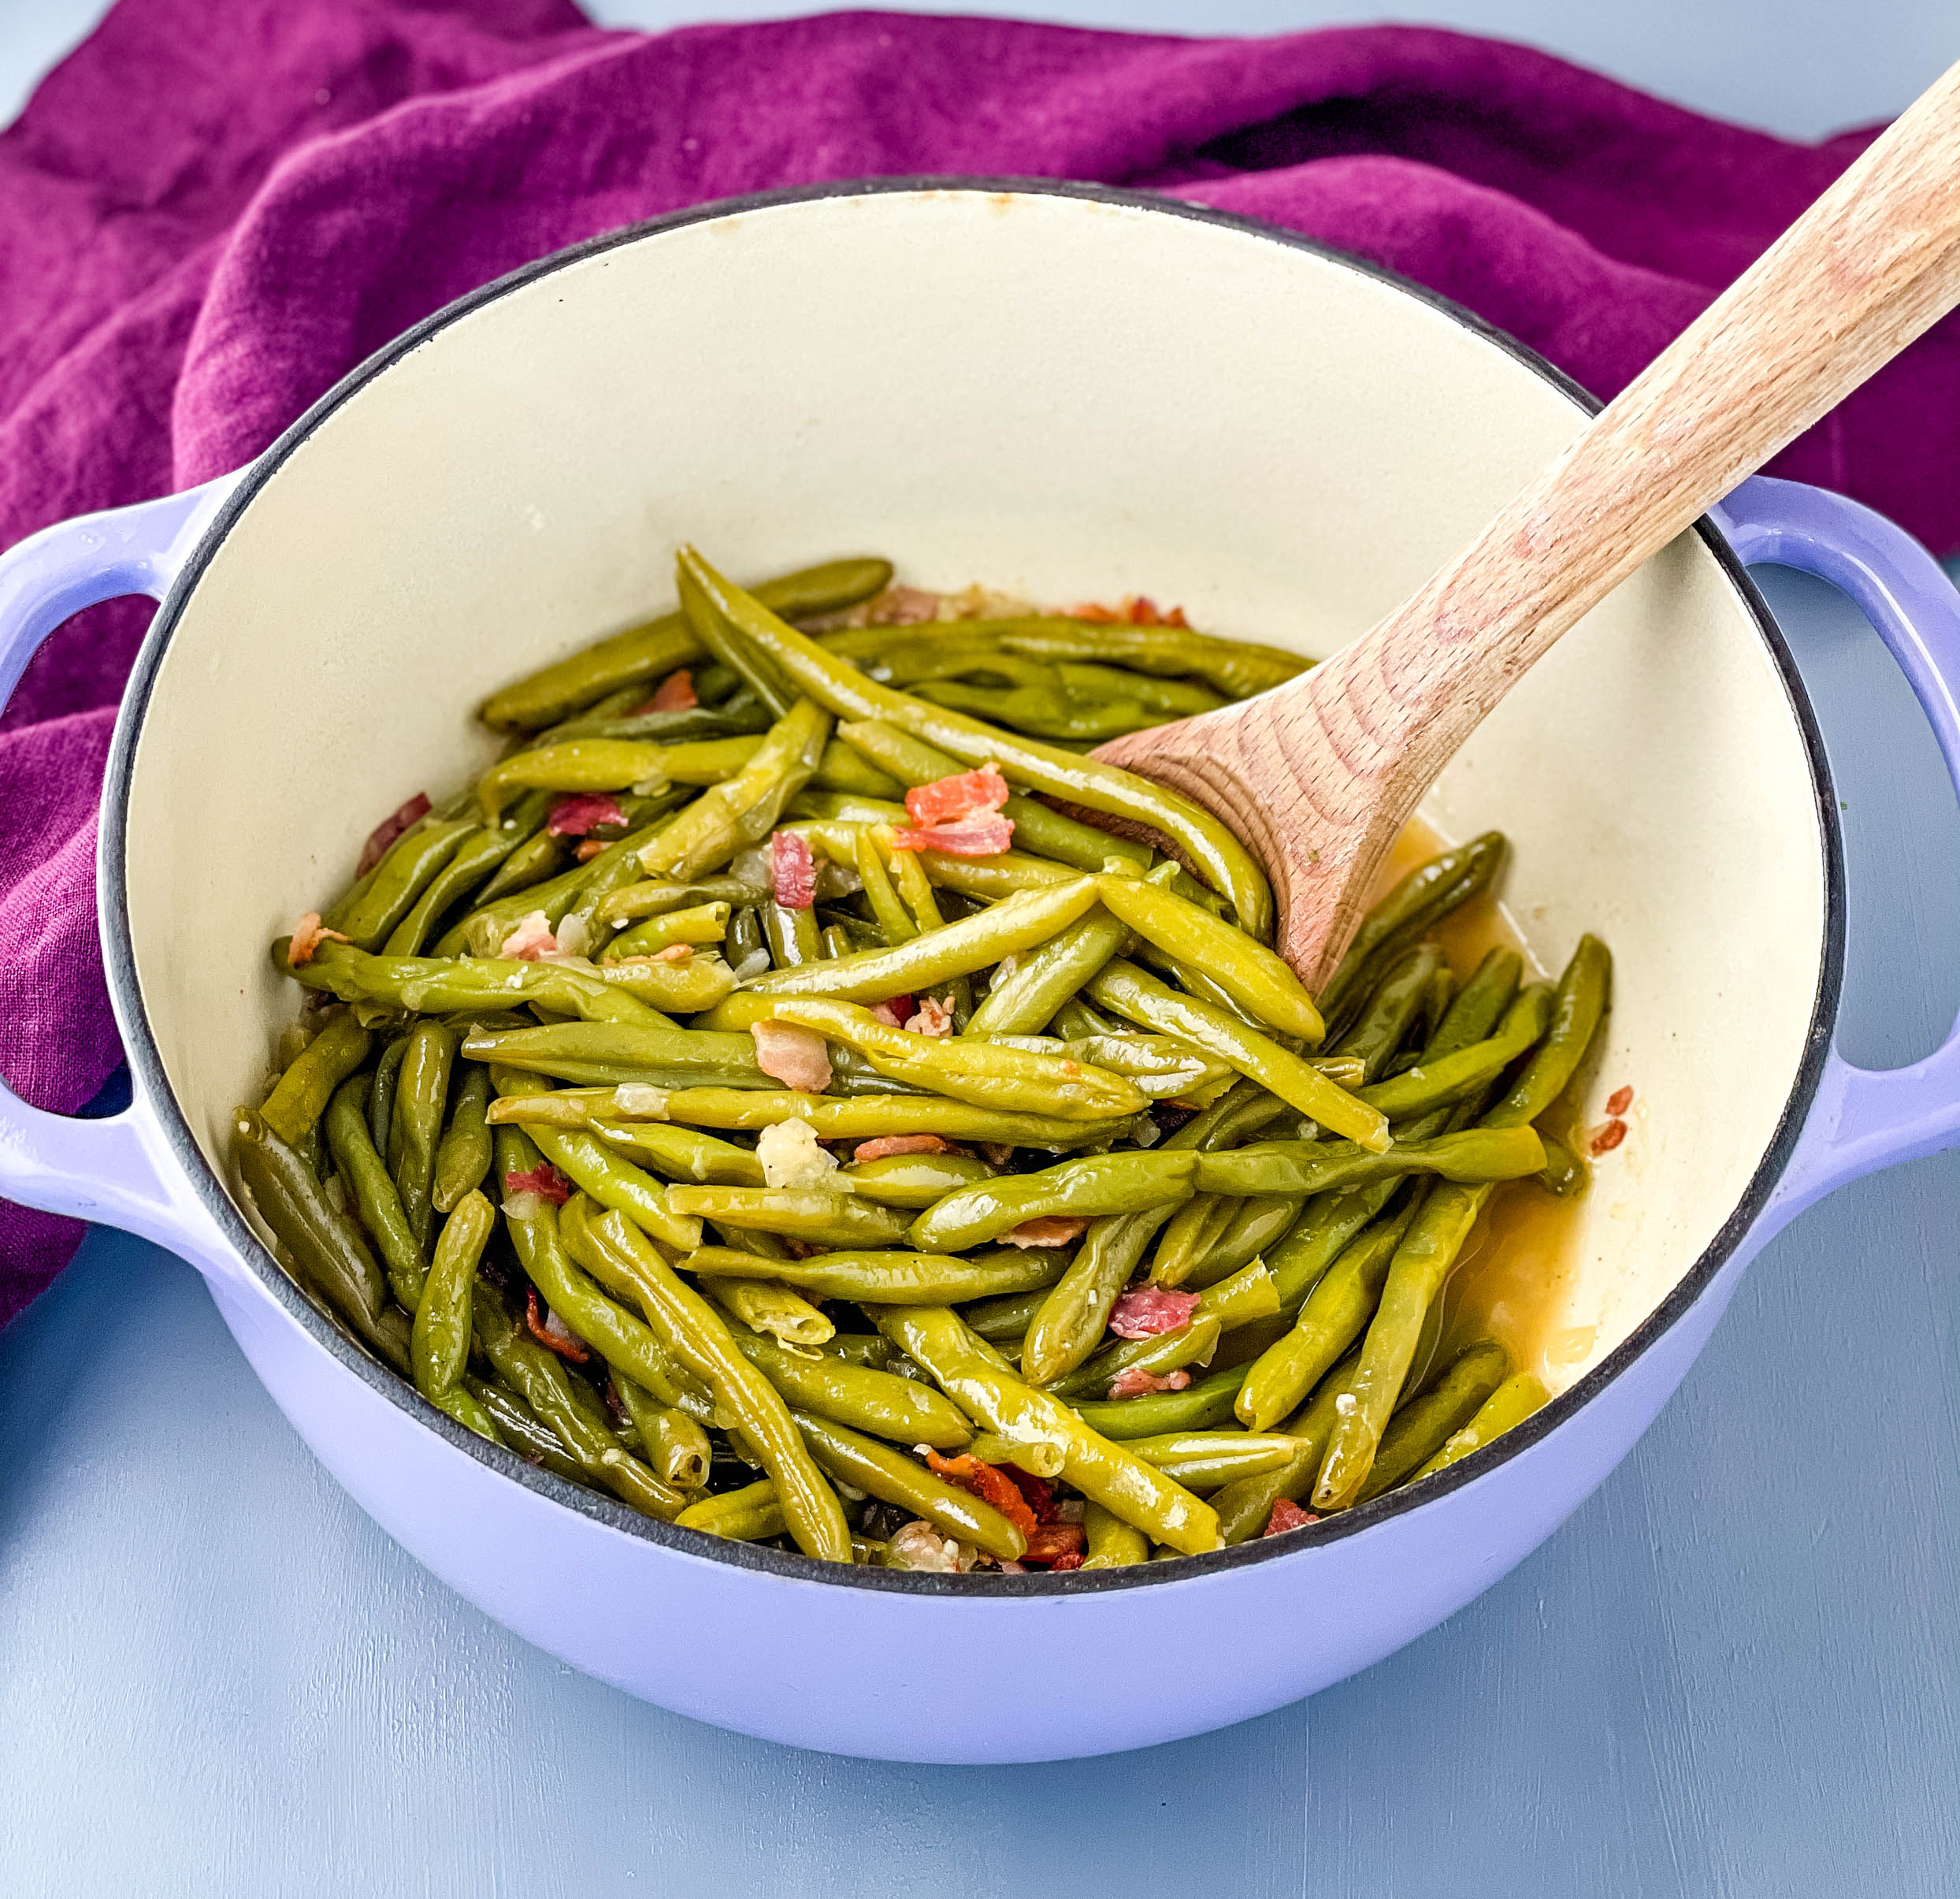 https://www.staysnatched.com/wp-content/uploads/2021/04/southern-style-green-beans-1.jpg